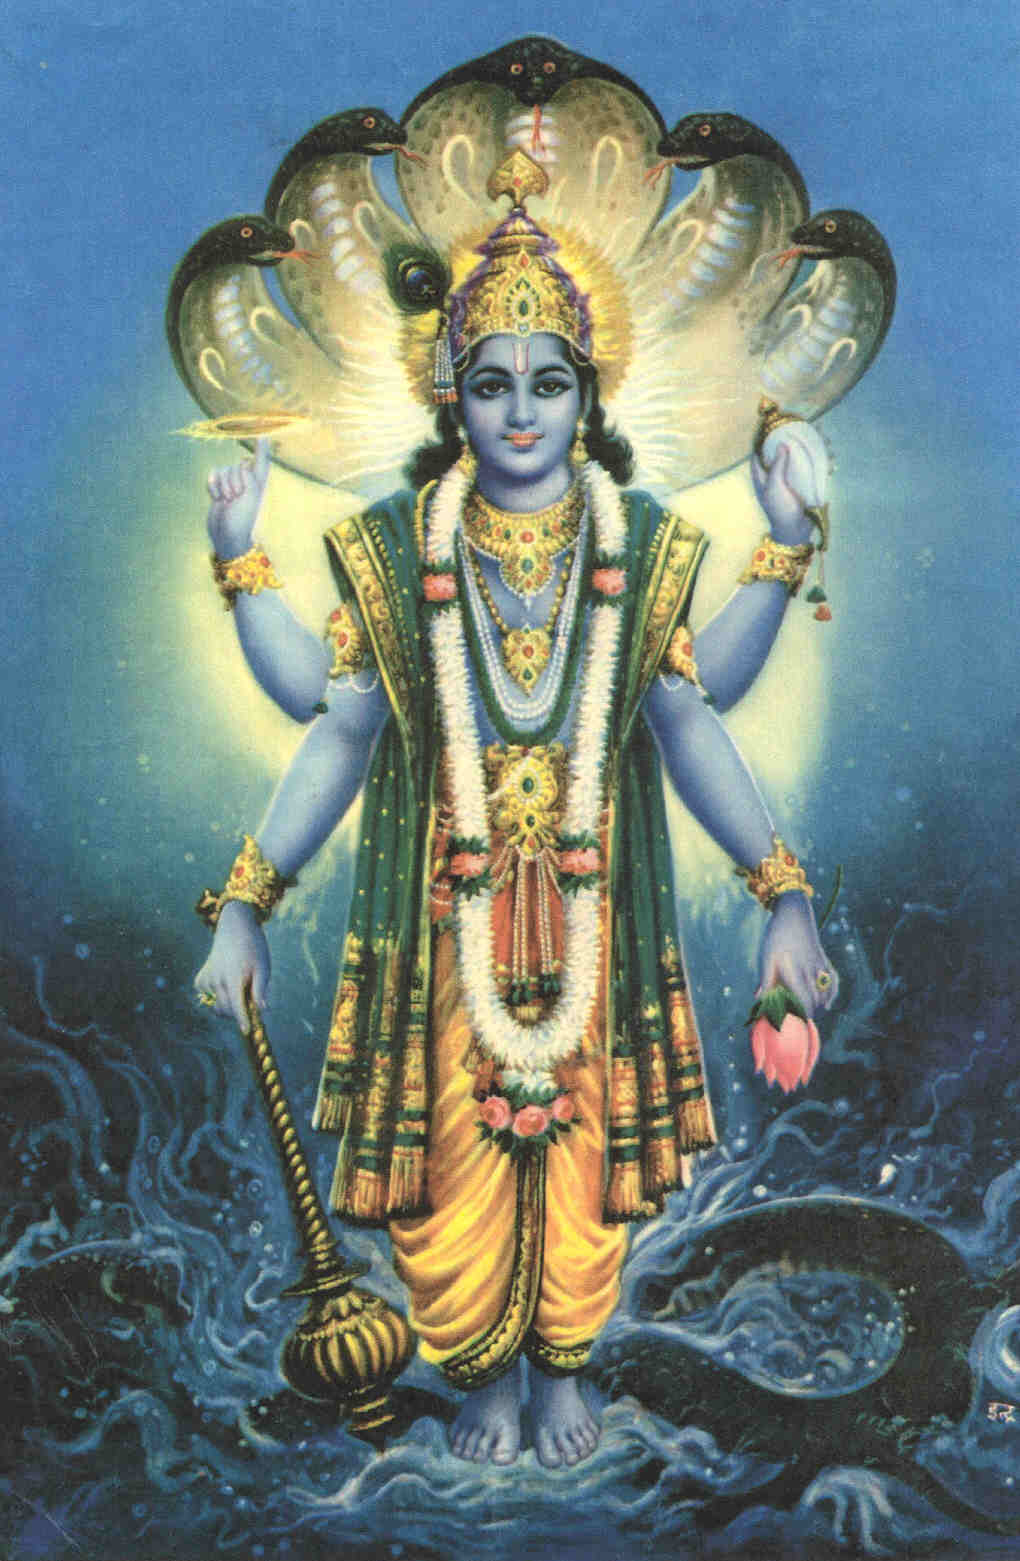 High Quality wallpapers, pictures and images of Lord Vishnu